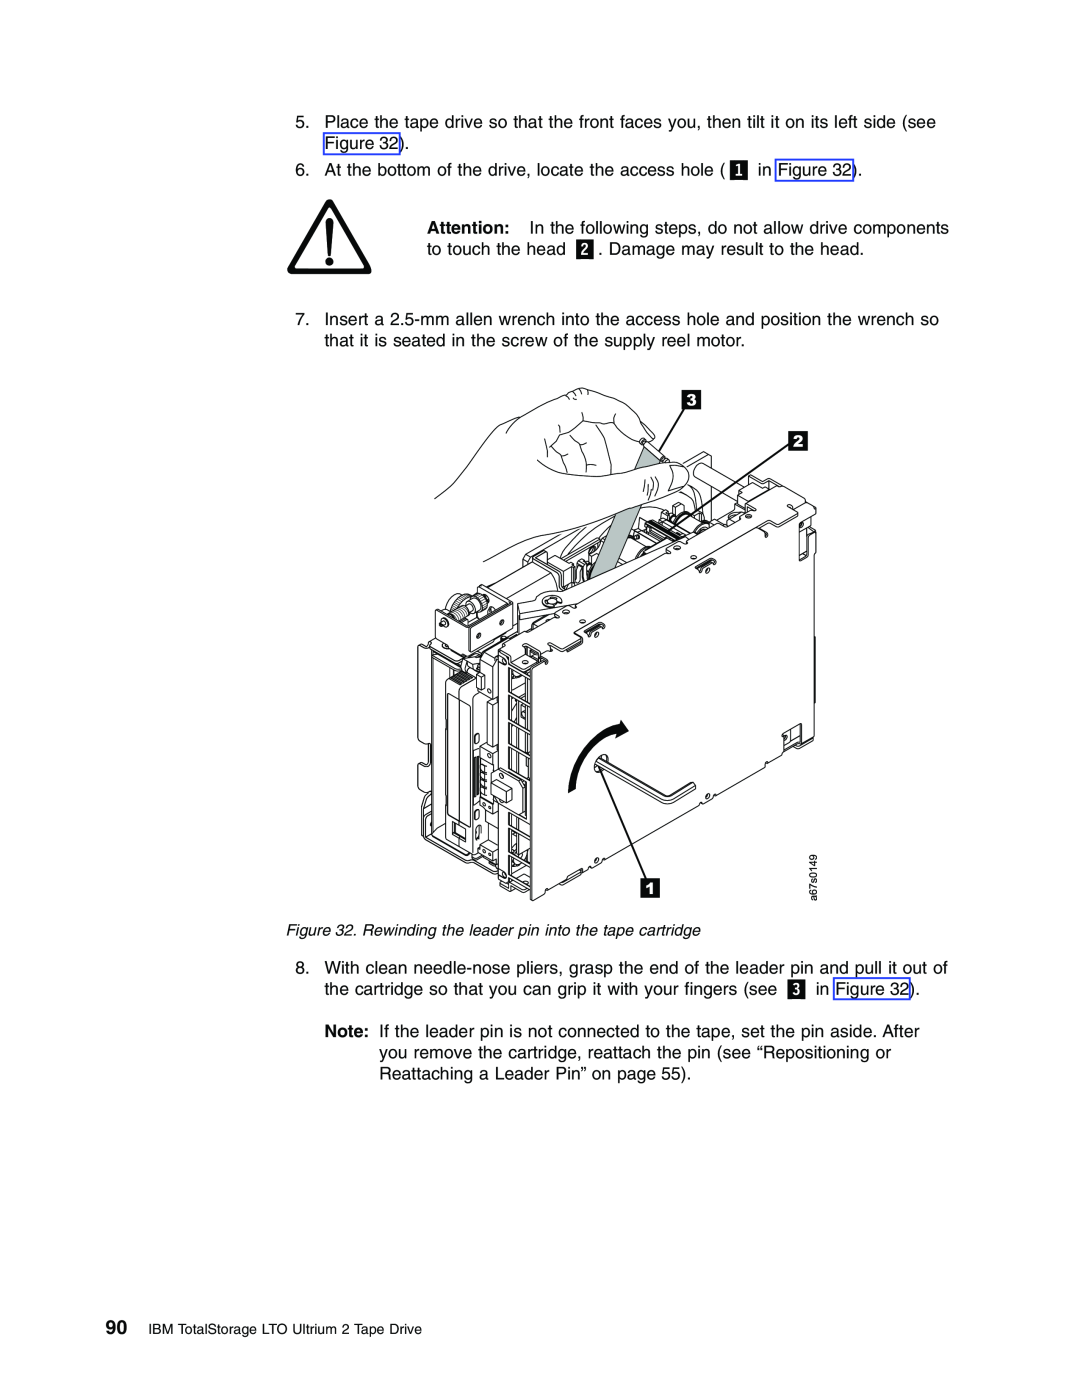 IBM T400F manual Rewinding the leader pin into the tape cartridge, IBM TotalStorage LTO Ultrium 2 Tape Drive 